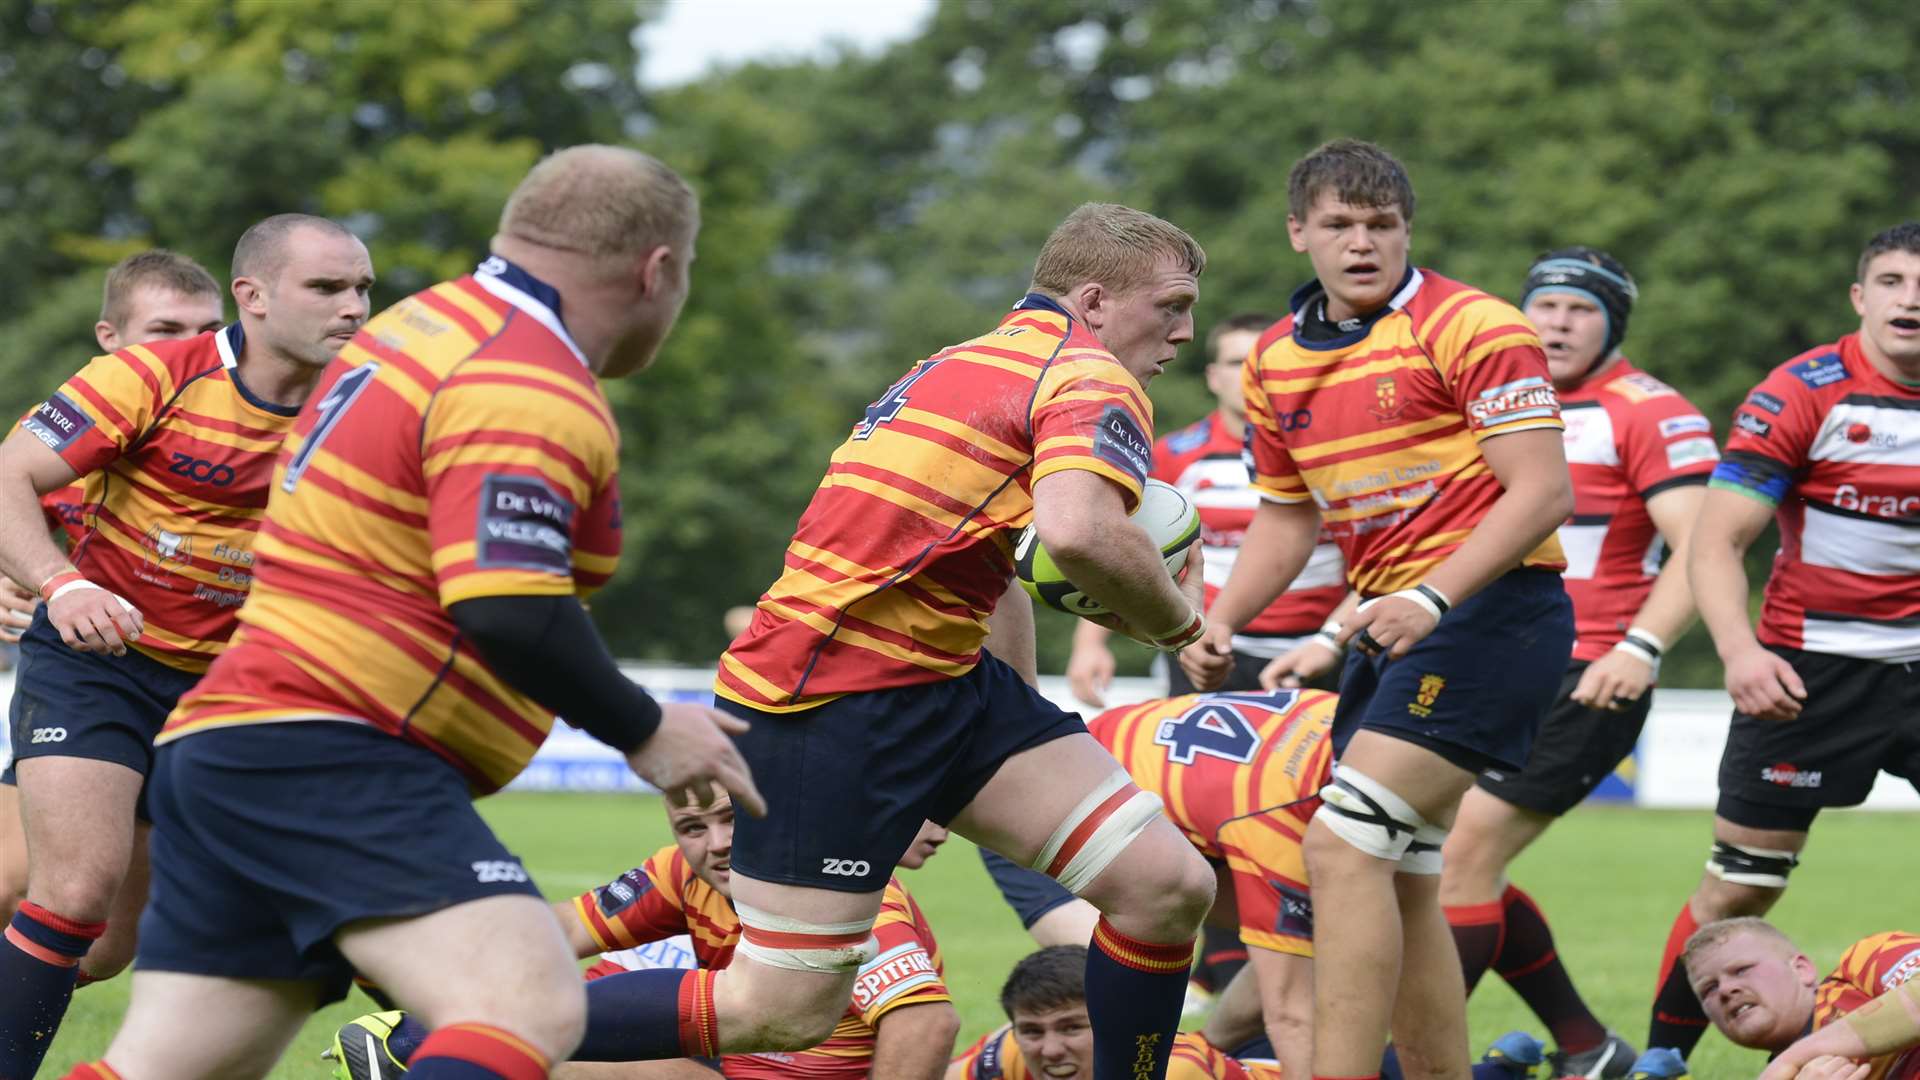 Medway Rugby Club in action